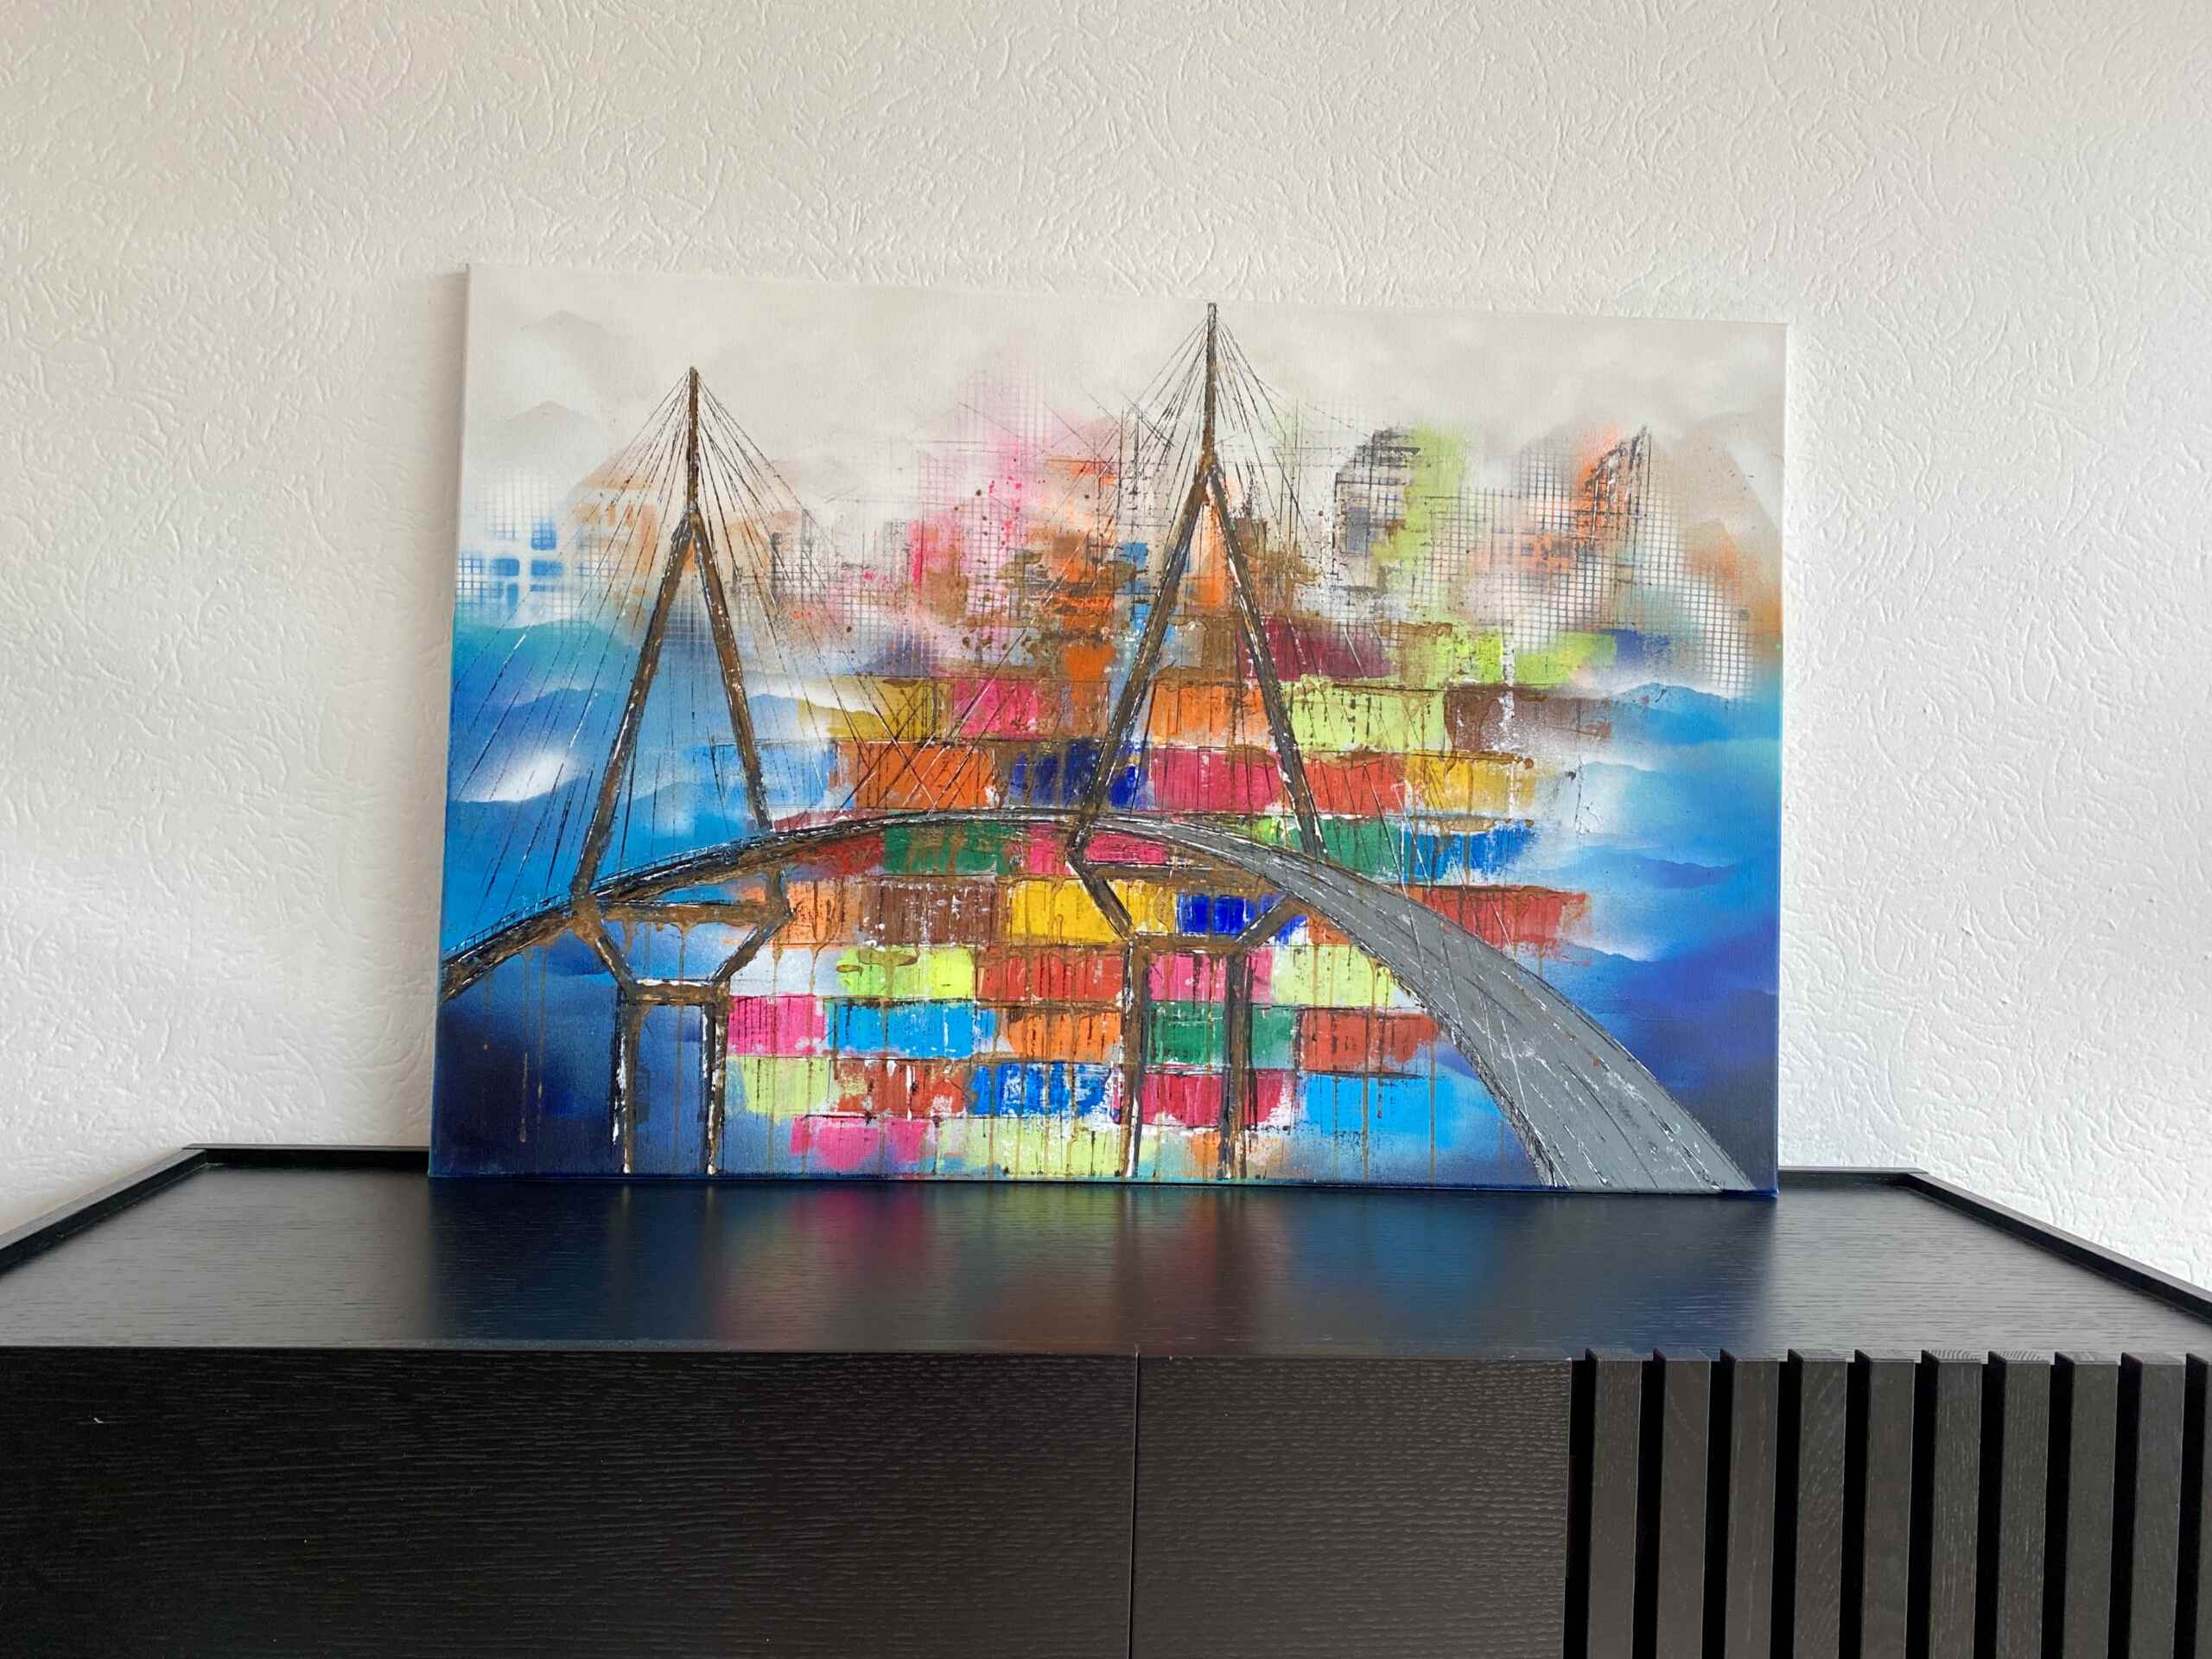 Artwork "Containers" by Nina Groth